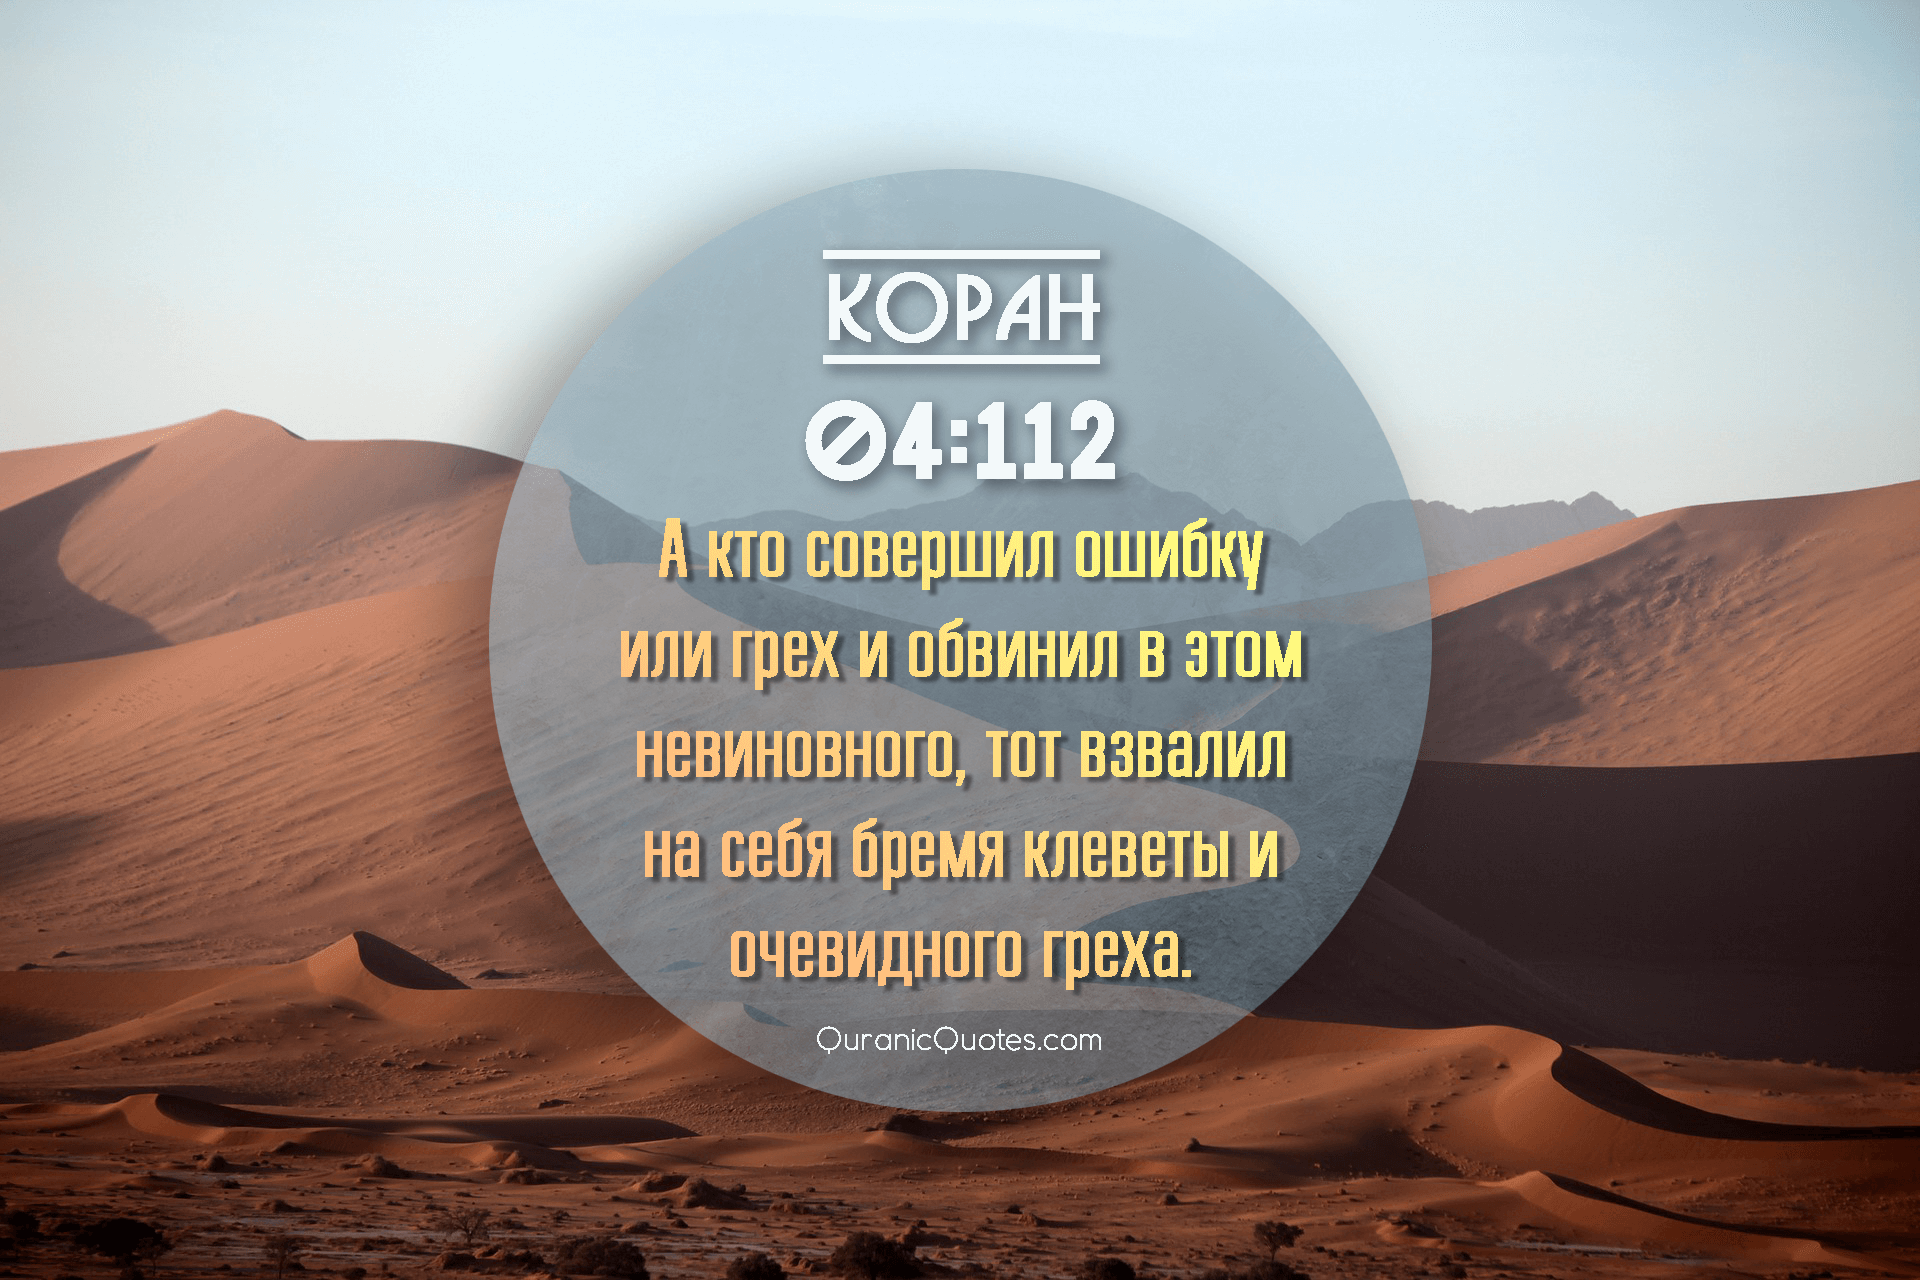 Quranic Quotes in Russian #04